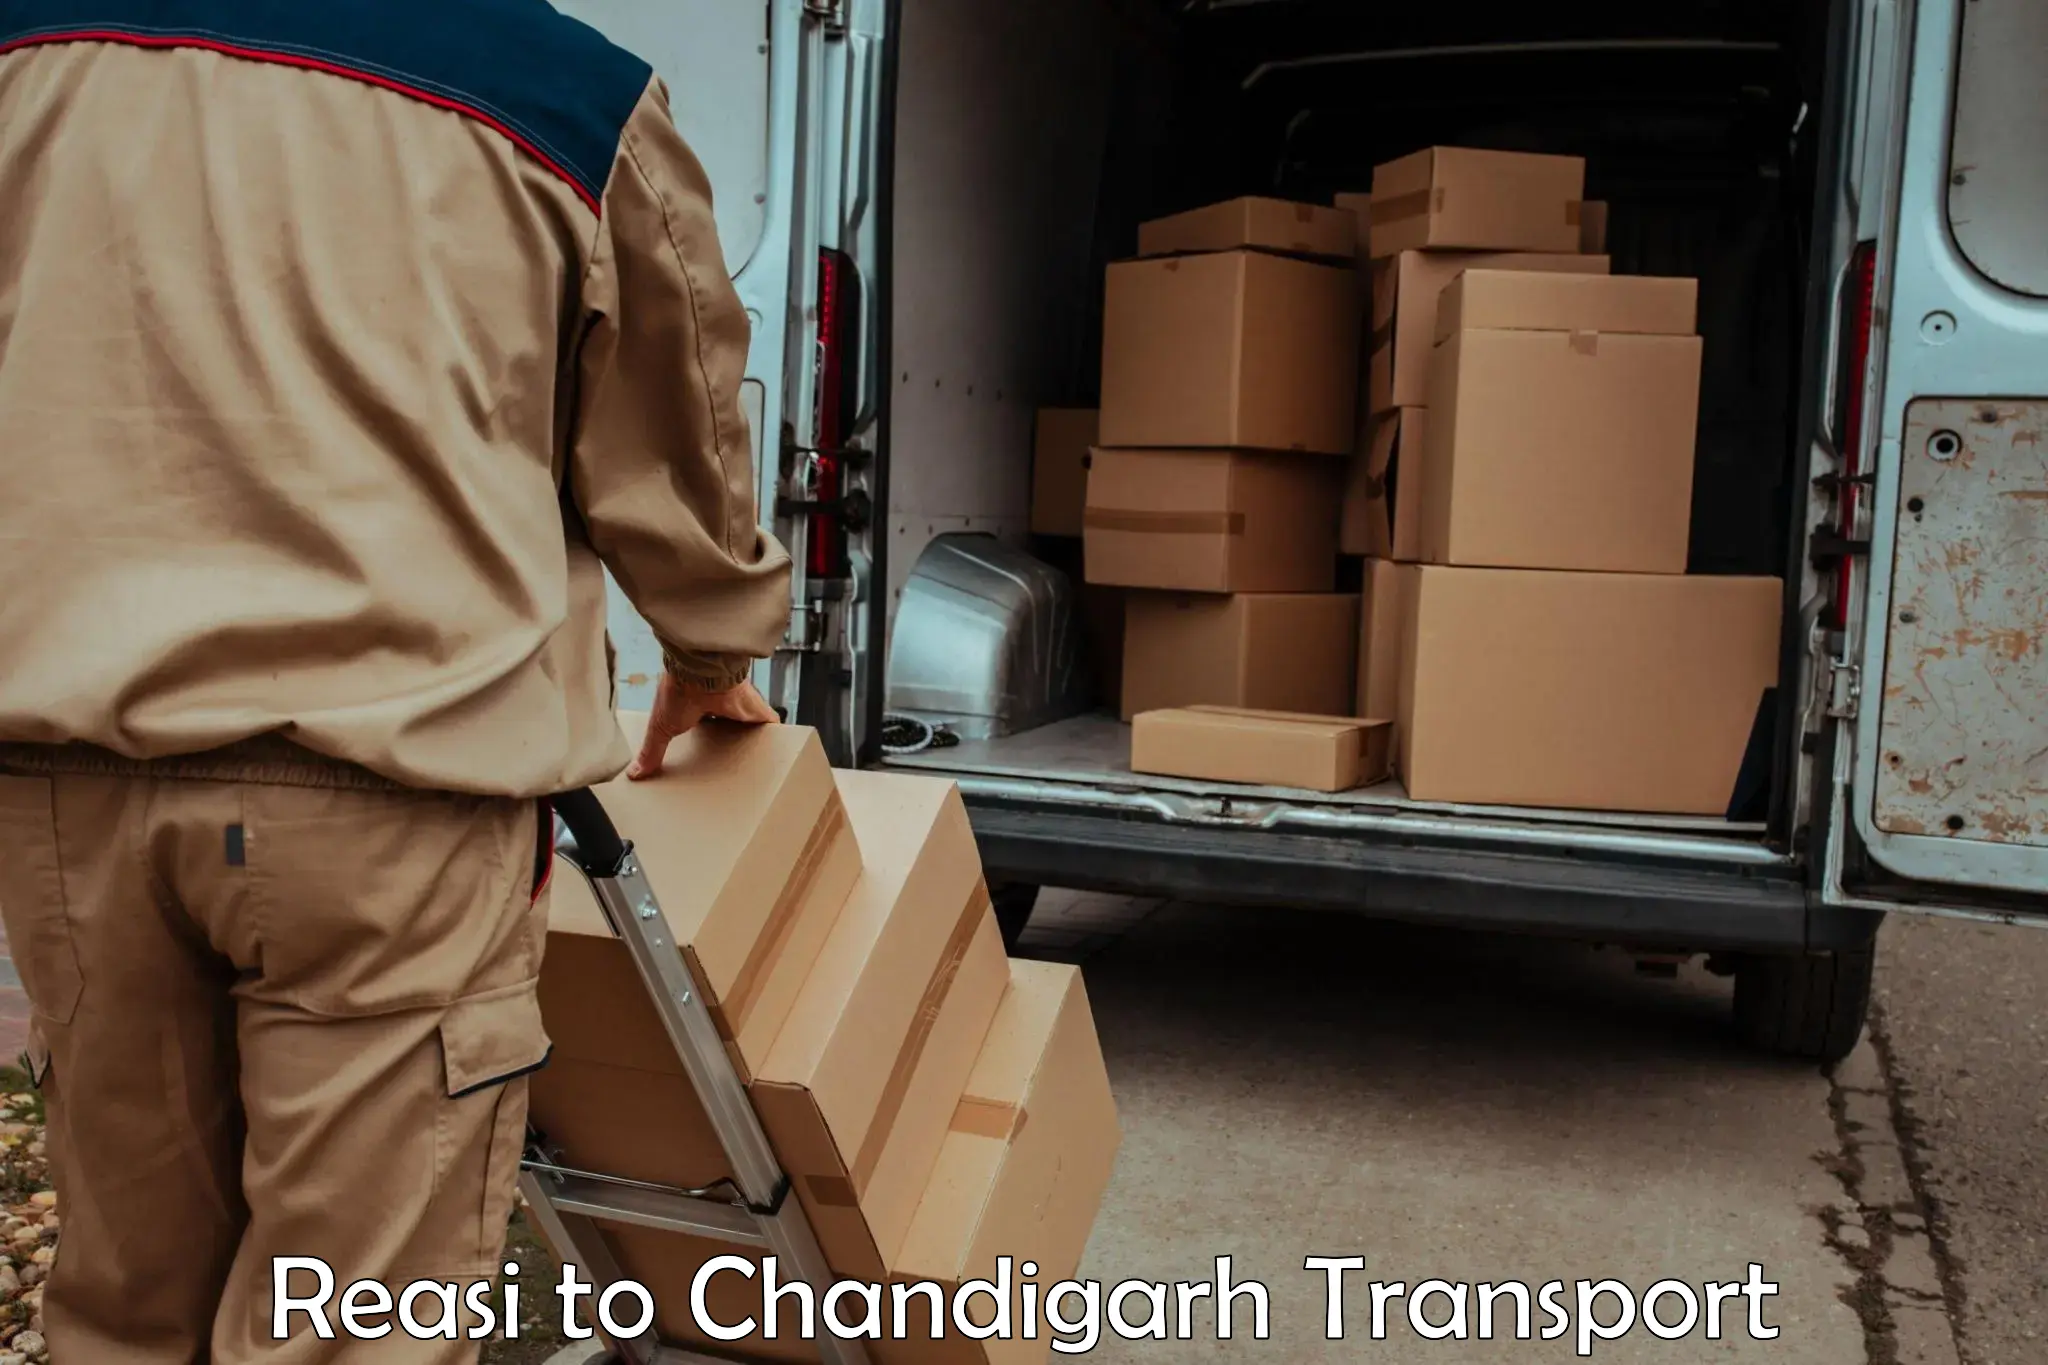 Transportation solution services Reasi to Chandigarh